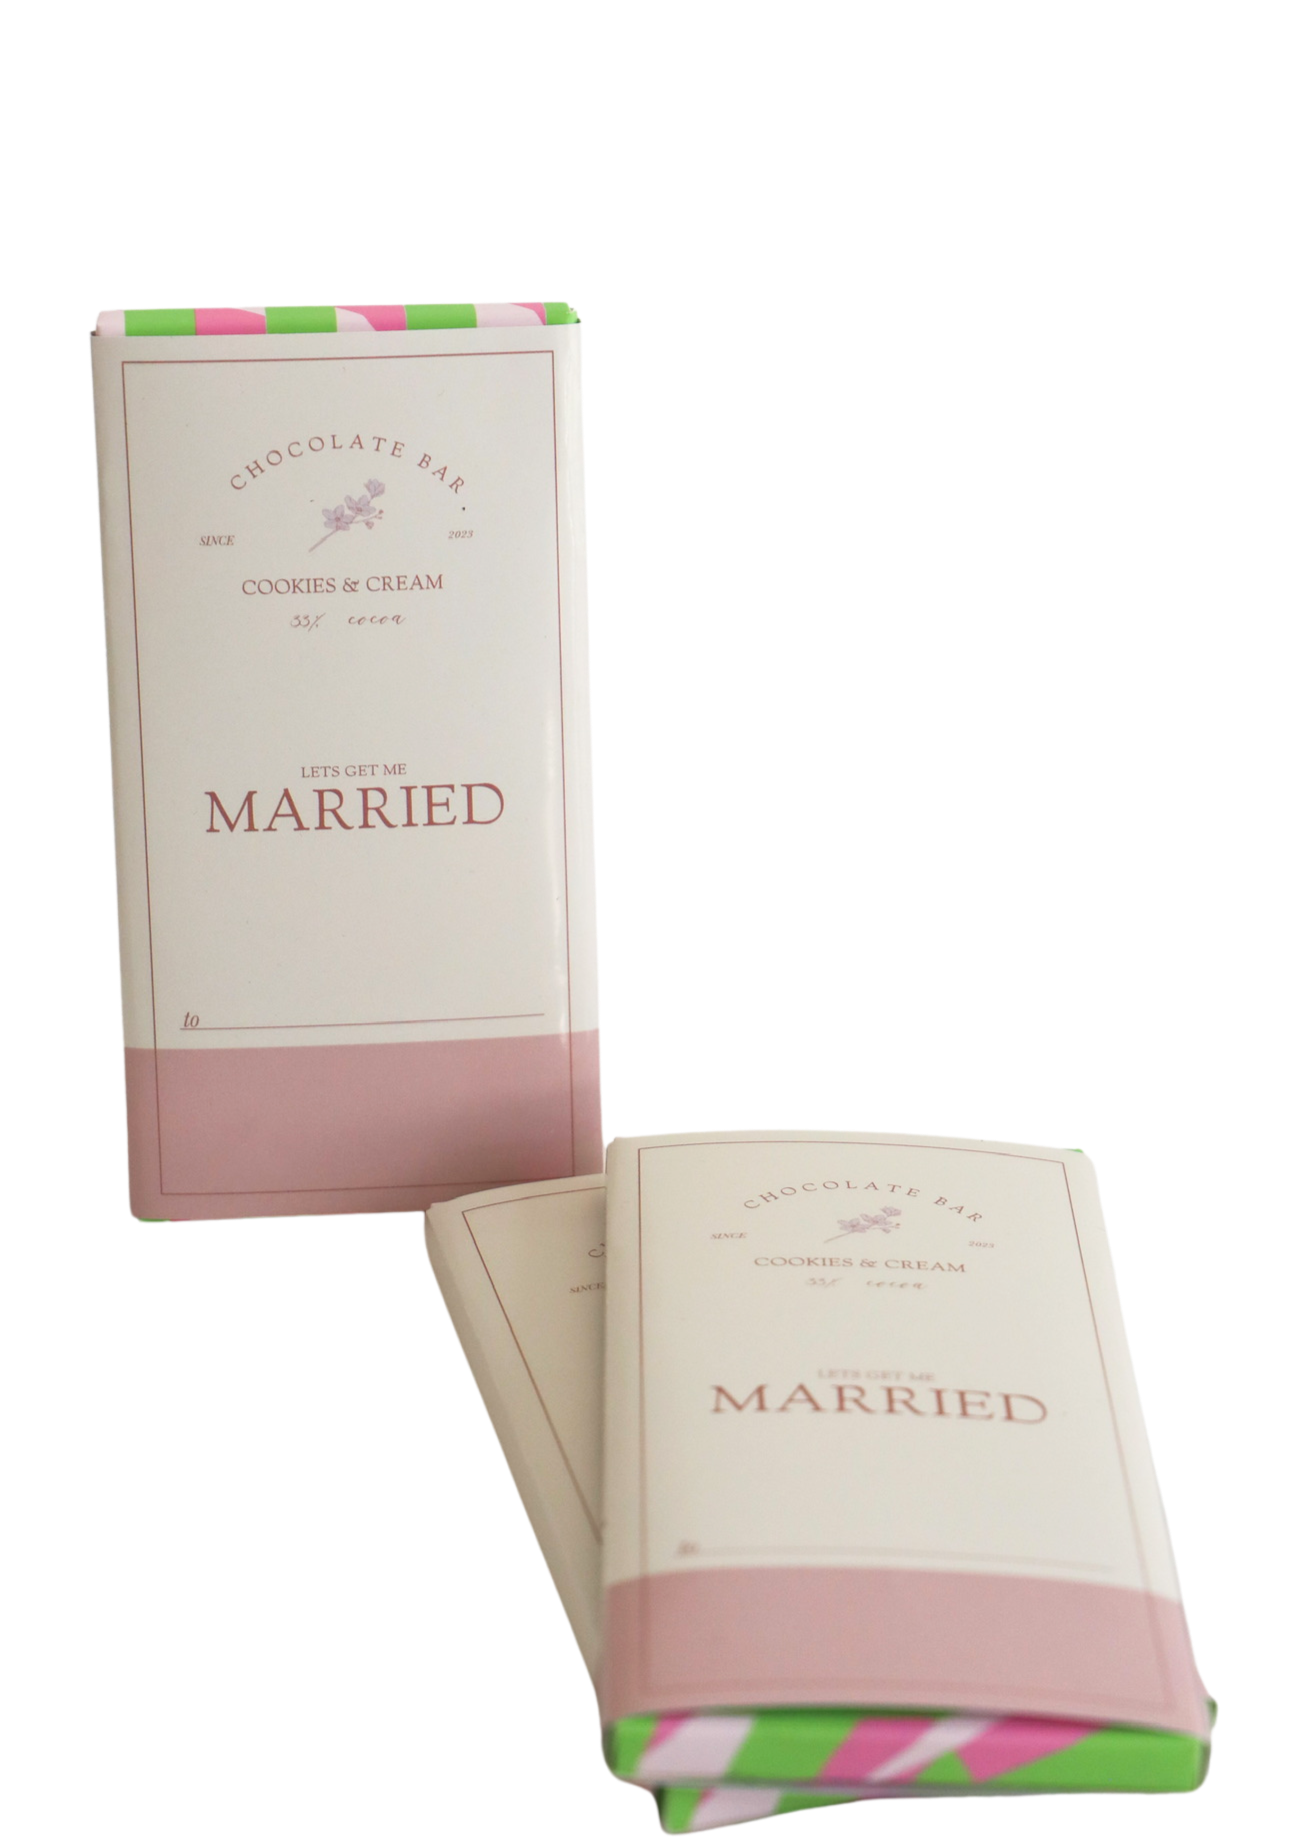 Indulge in our Let's Get Me Married chocolate bar, specially customized for bridesmaids. Savor the rich, decadent taste while celebrating the special occasion. A perfect way to show appreciation to your bridal party and create sweet memories. Treat yourself and your bridesmaids with this delectable and unique bar. Chocolate by Lal's